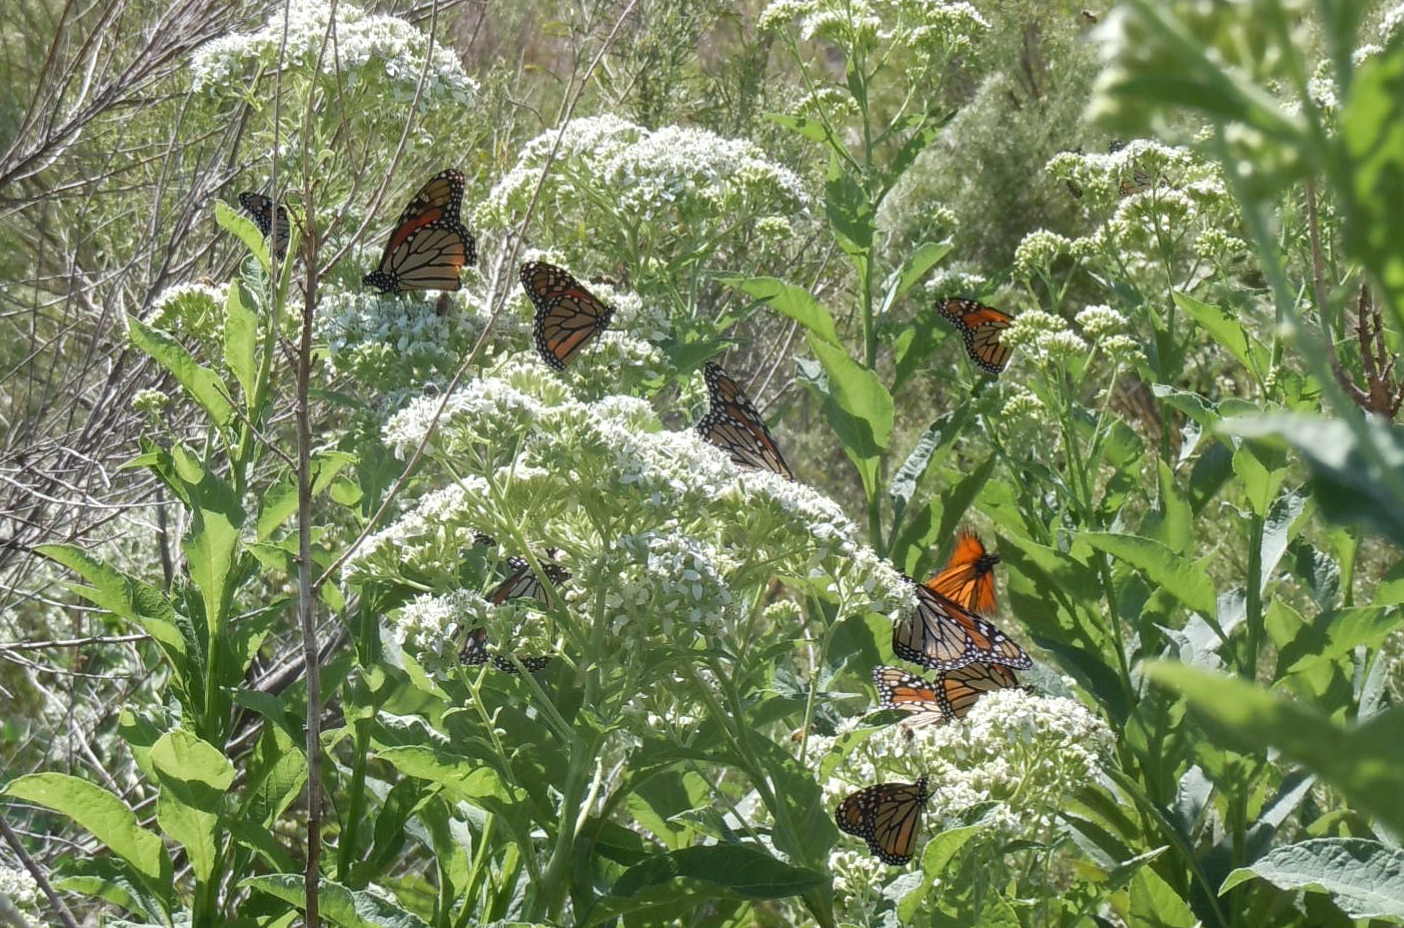  Monarch butterflies are on their way